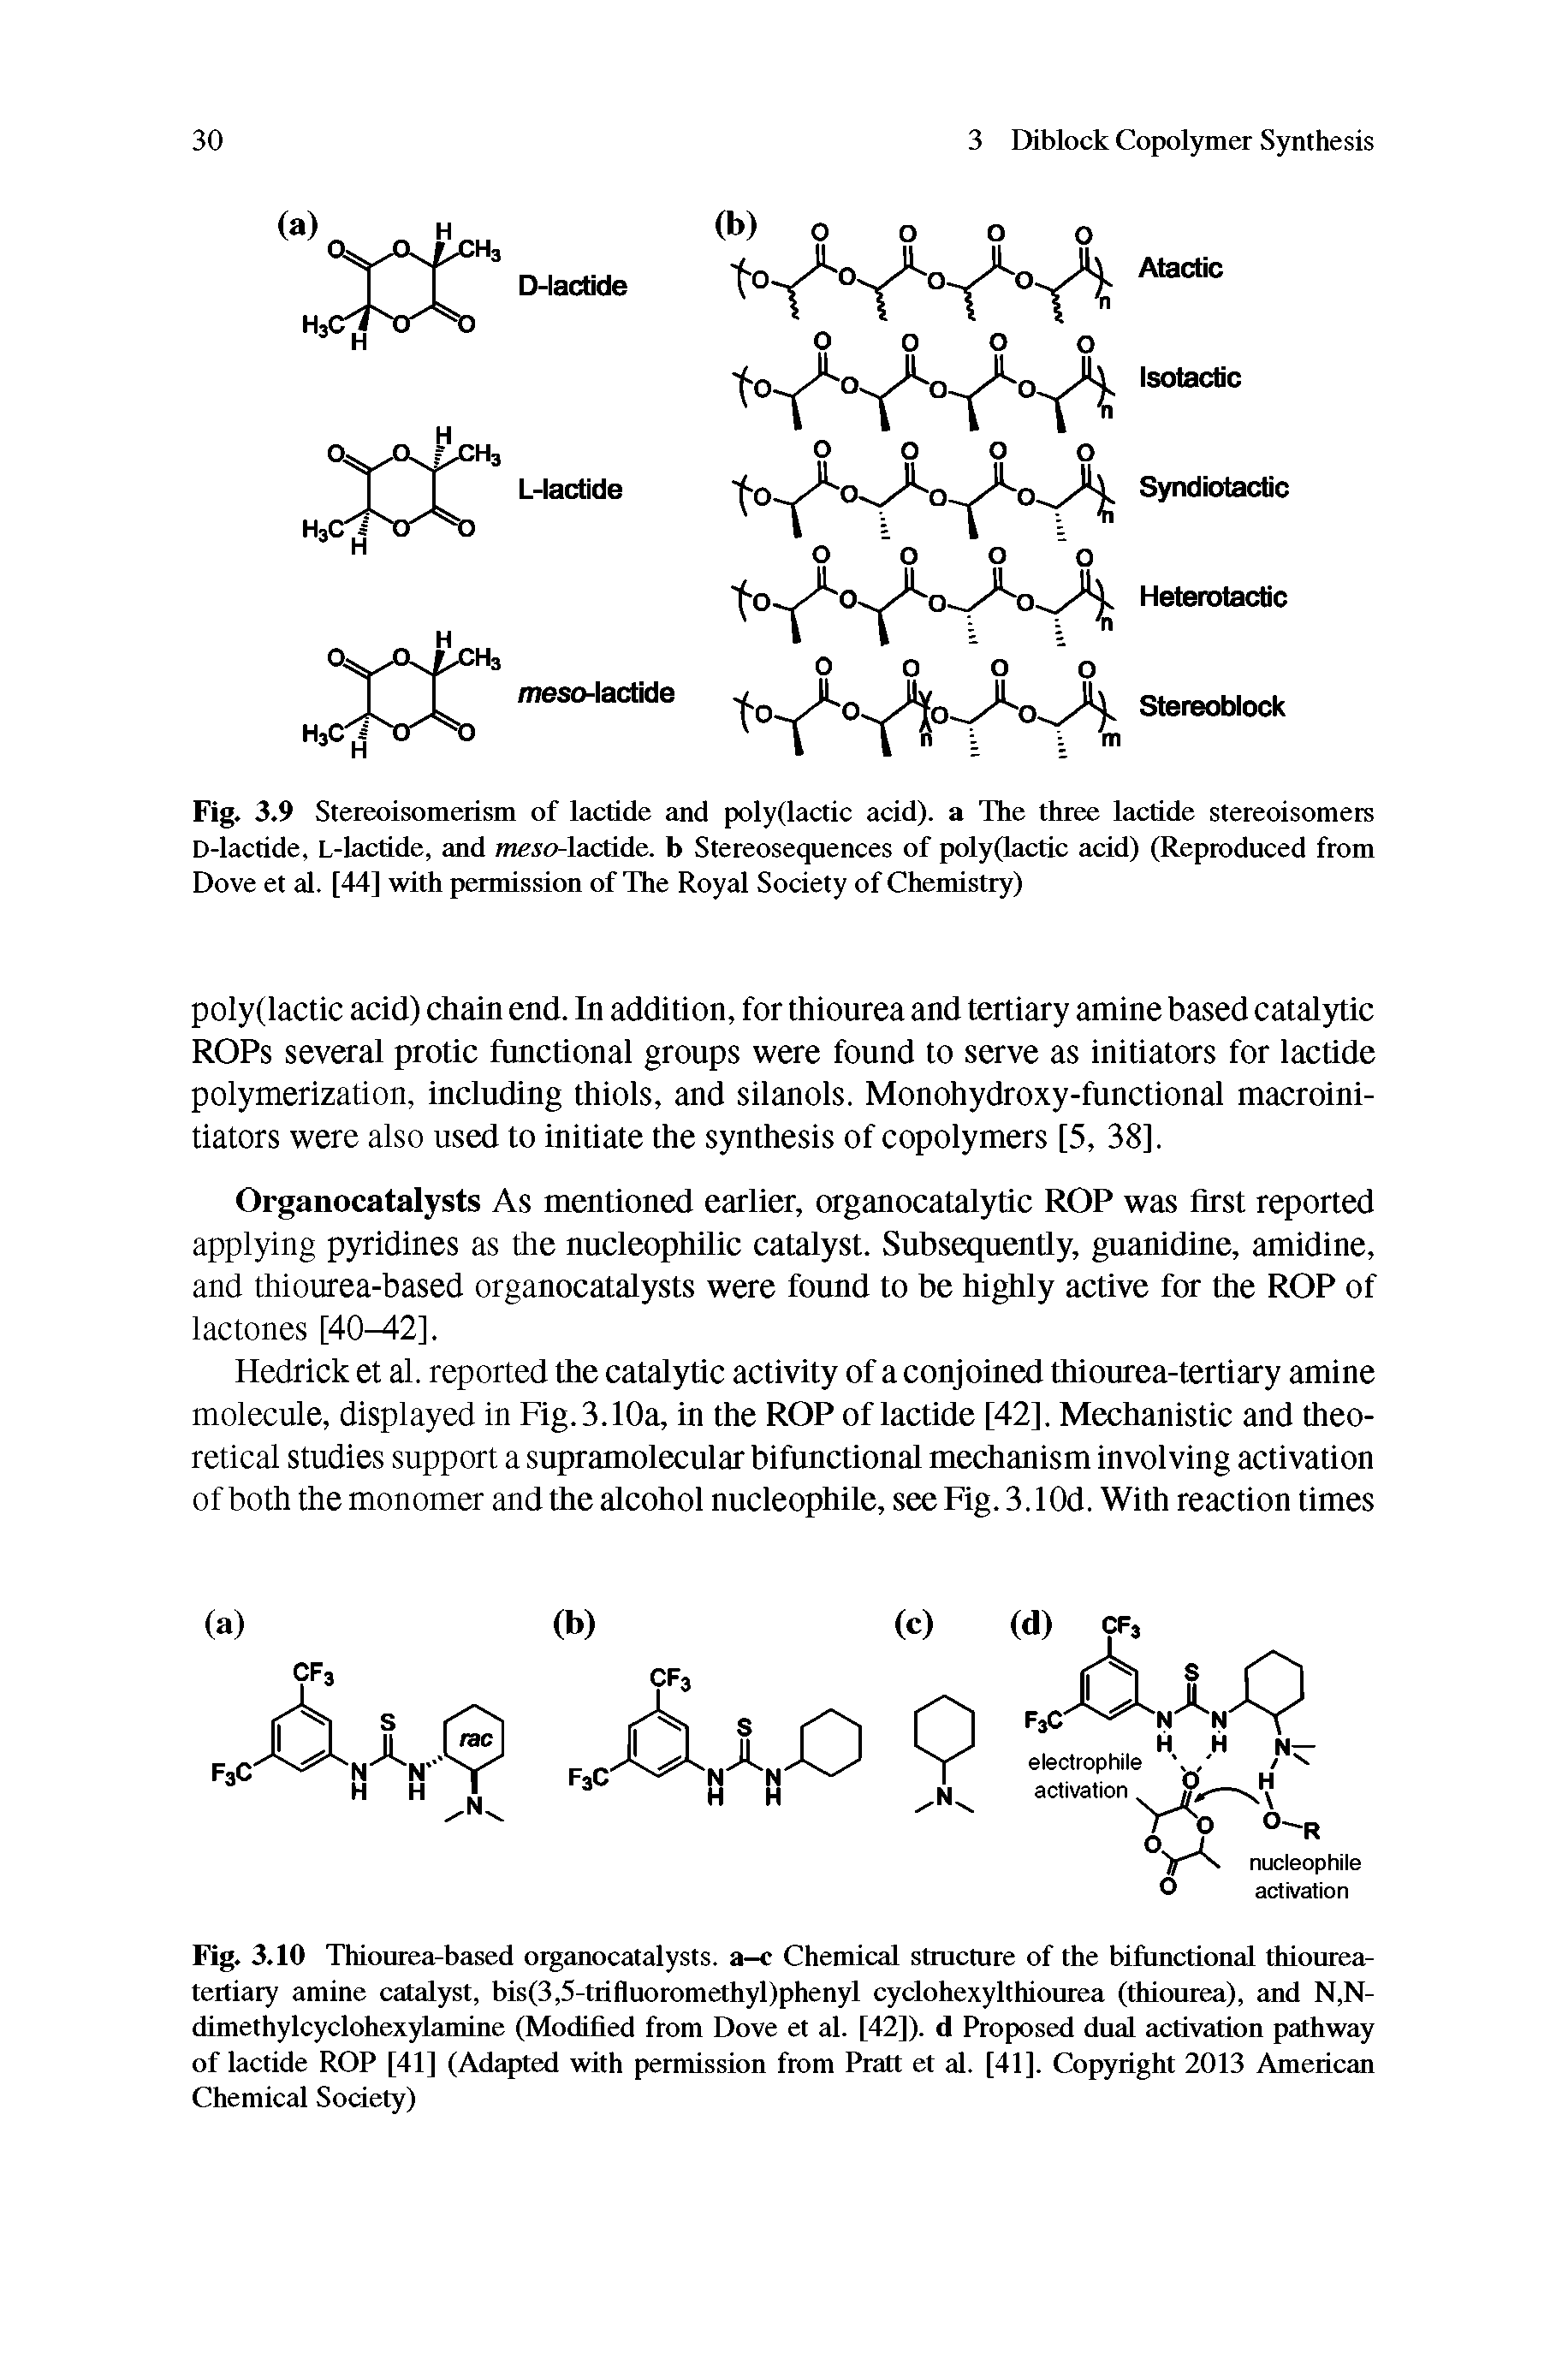 Fig. 3.9 Stereoisomerism of lactide and poly(lactic acid), a The three lactide stereoisomers D-lactide, L-lactide, and meso-lactide. b Stereosequences of poly(lactic acid) (Reproduced from Dove et al. [44] with permission of The Royal Society of Chemistry)...